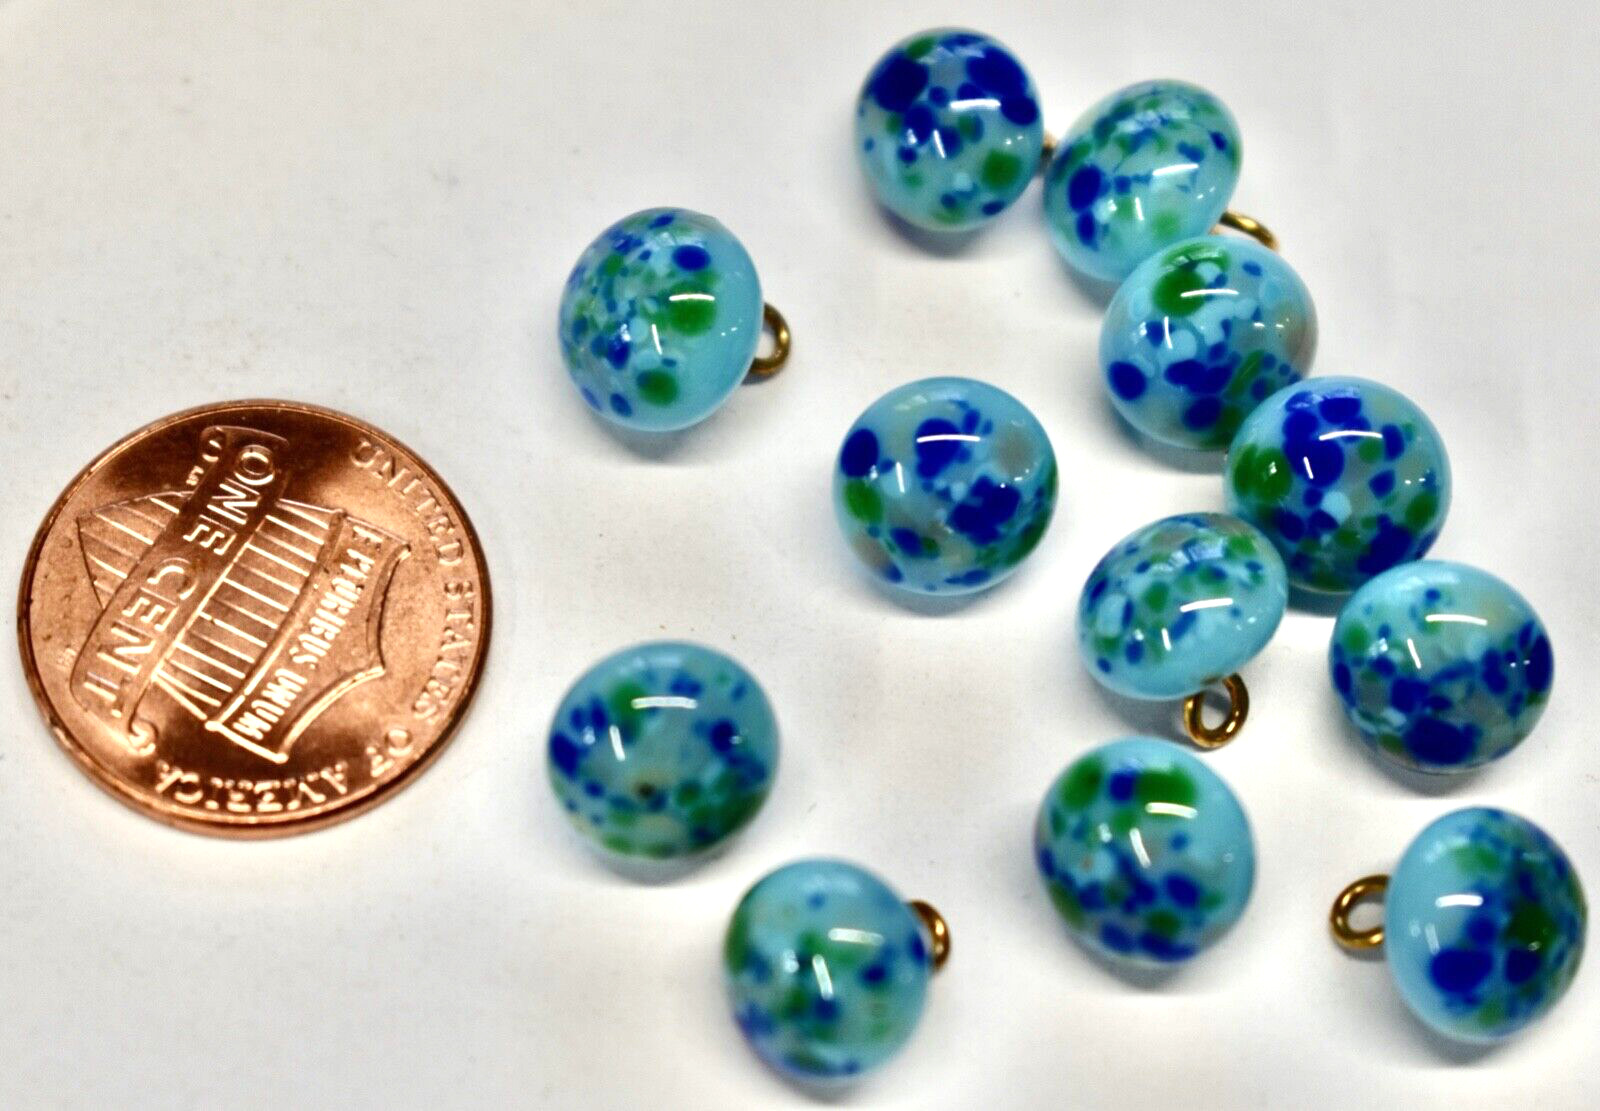 VINTAGE TURQUOISE millefiore BUTTONS JAPANESE GLASS BEADS • 9mm  BLUE FLORAL